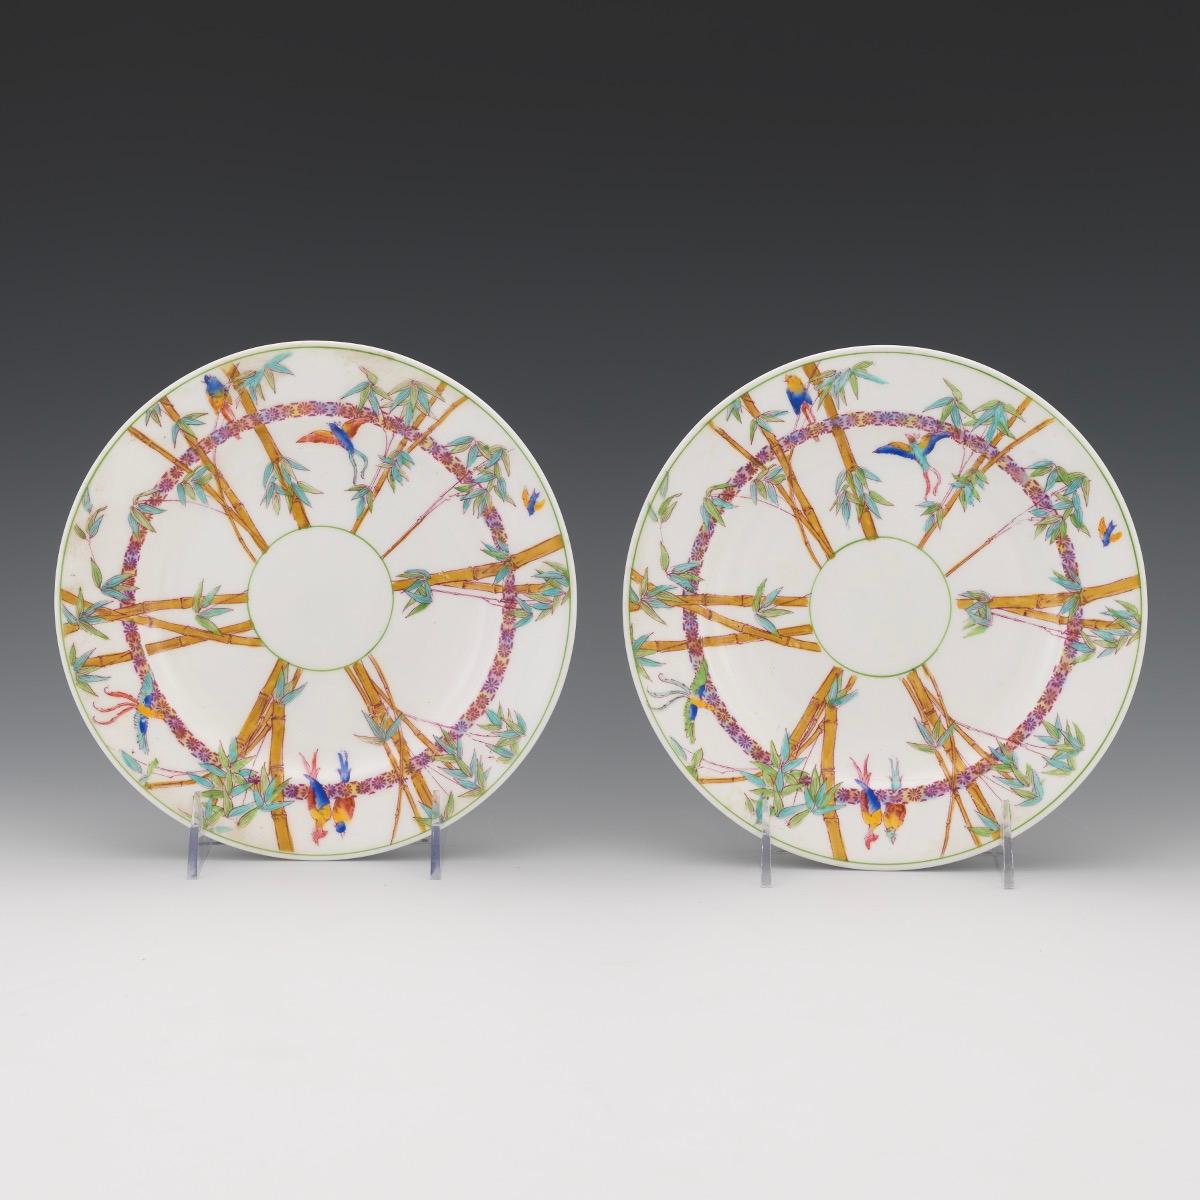 20th Century Tropical Birds Amongst Bamboo Set of 12 Plates, George Jones & Sons for Tiffany